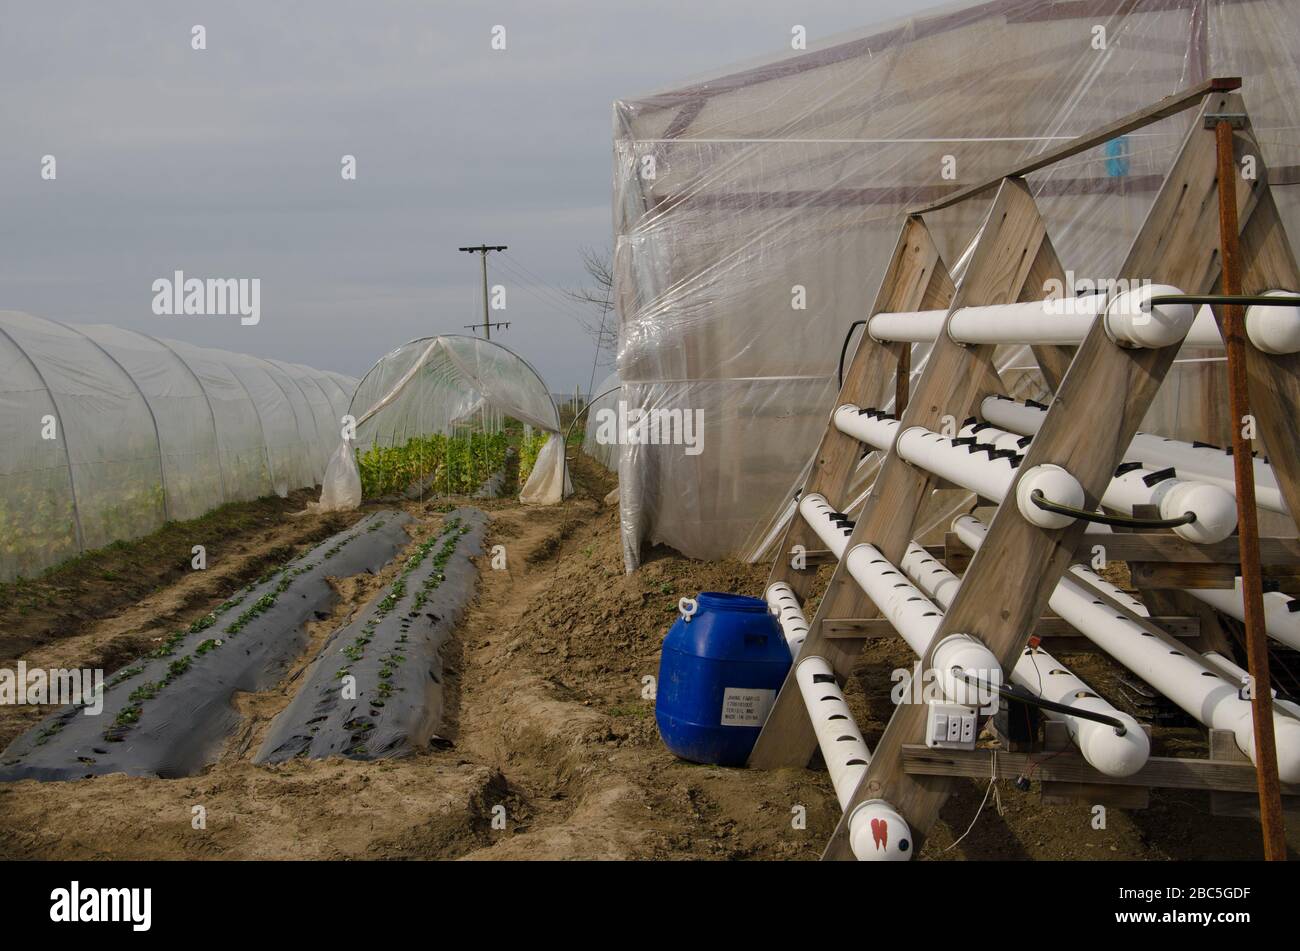 Hedroponic system at Agriomic Farm in Balkasar in Punjab province of Pakistan. Stock Photo